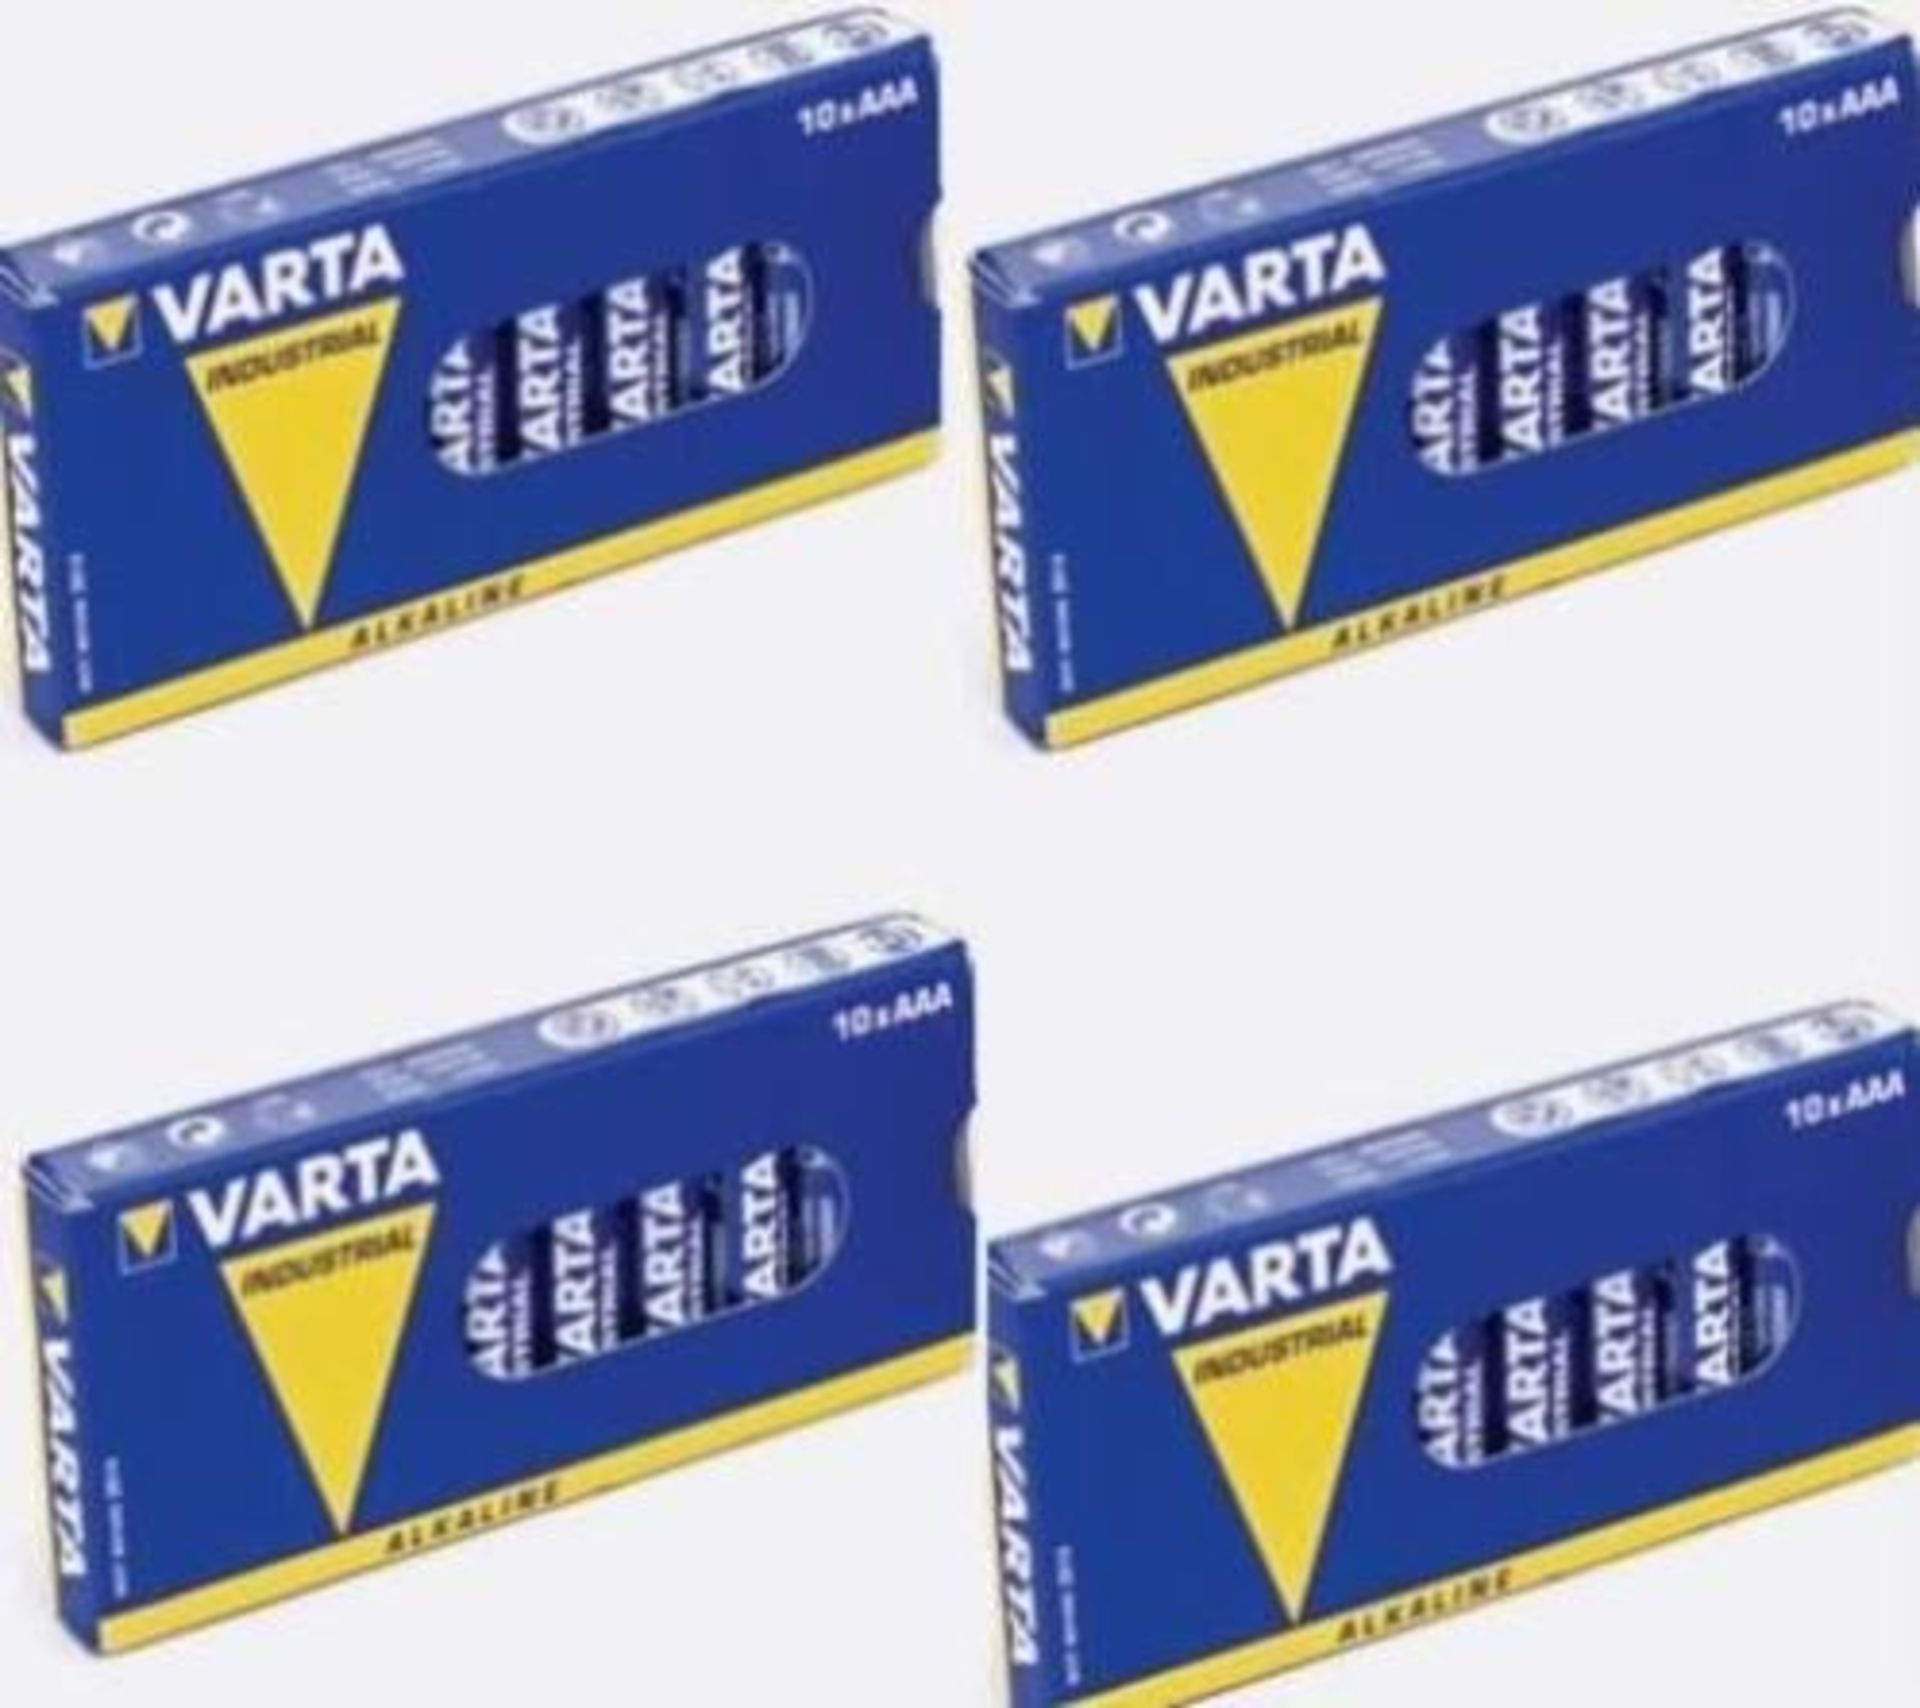 V *TRADE QTY* Brand New Four Packs Of 10 AAA Varta Industrial Batteries X 3 YOUR BID PRICE TO BE